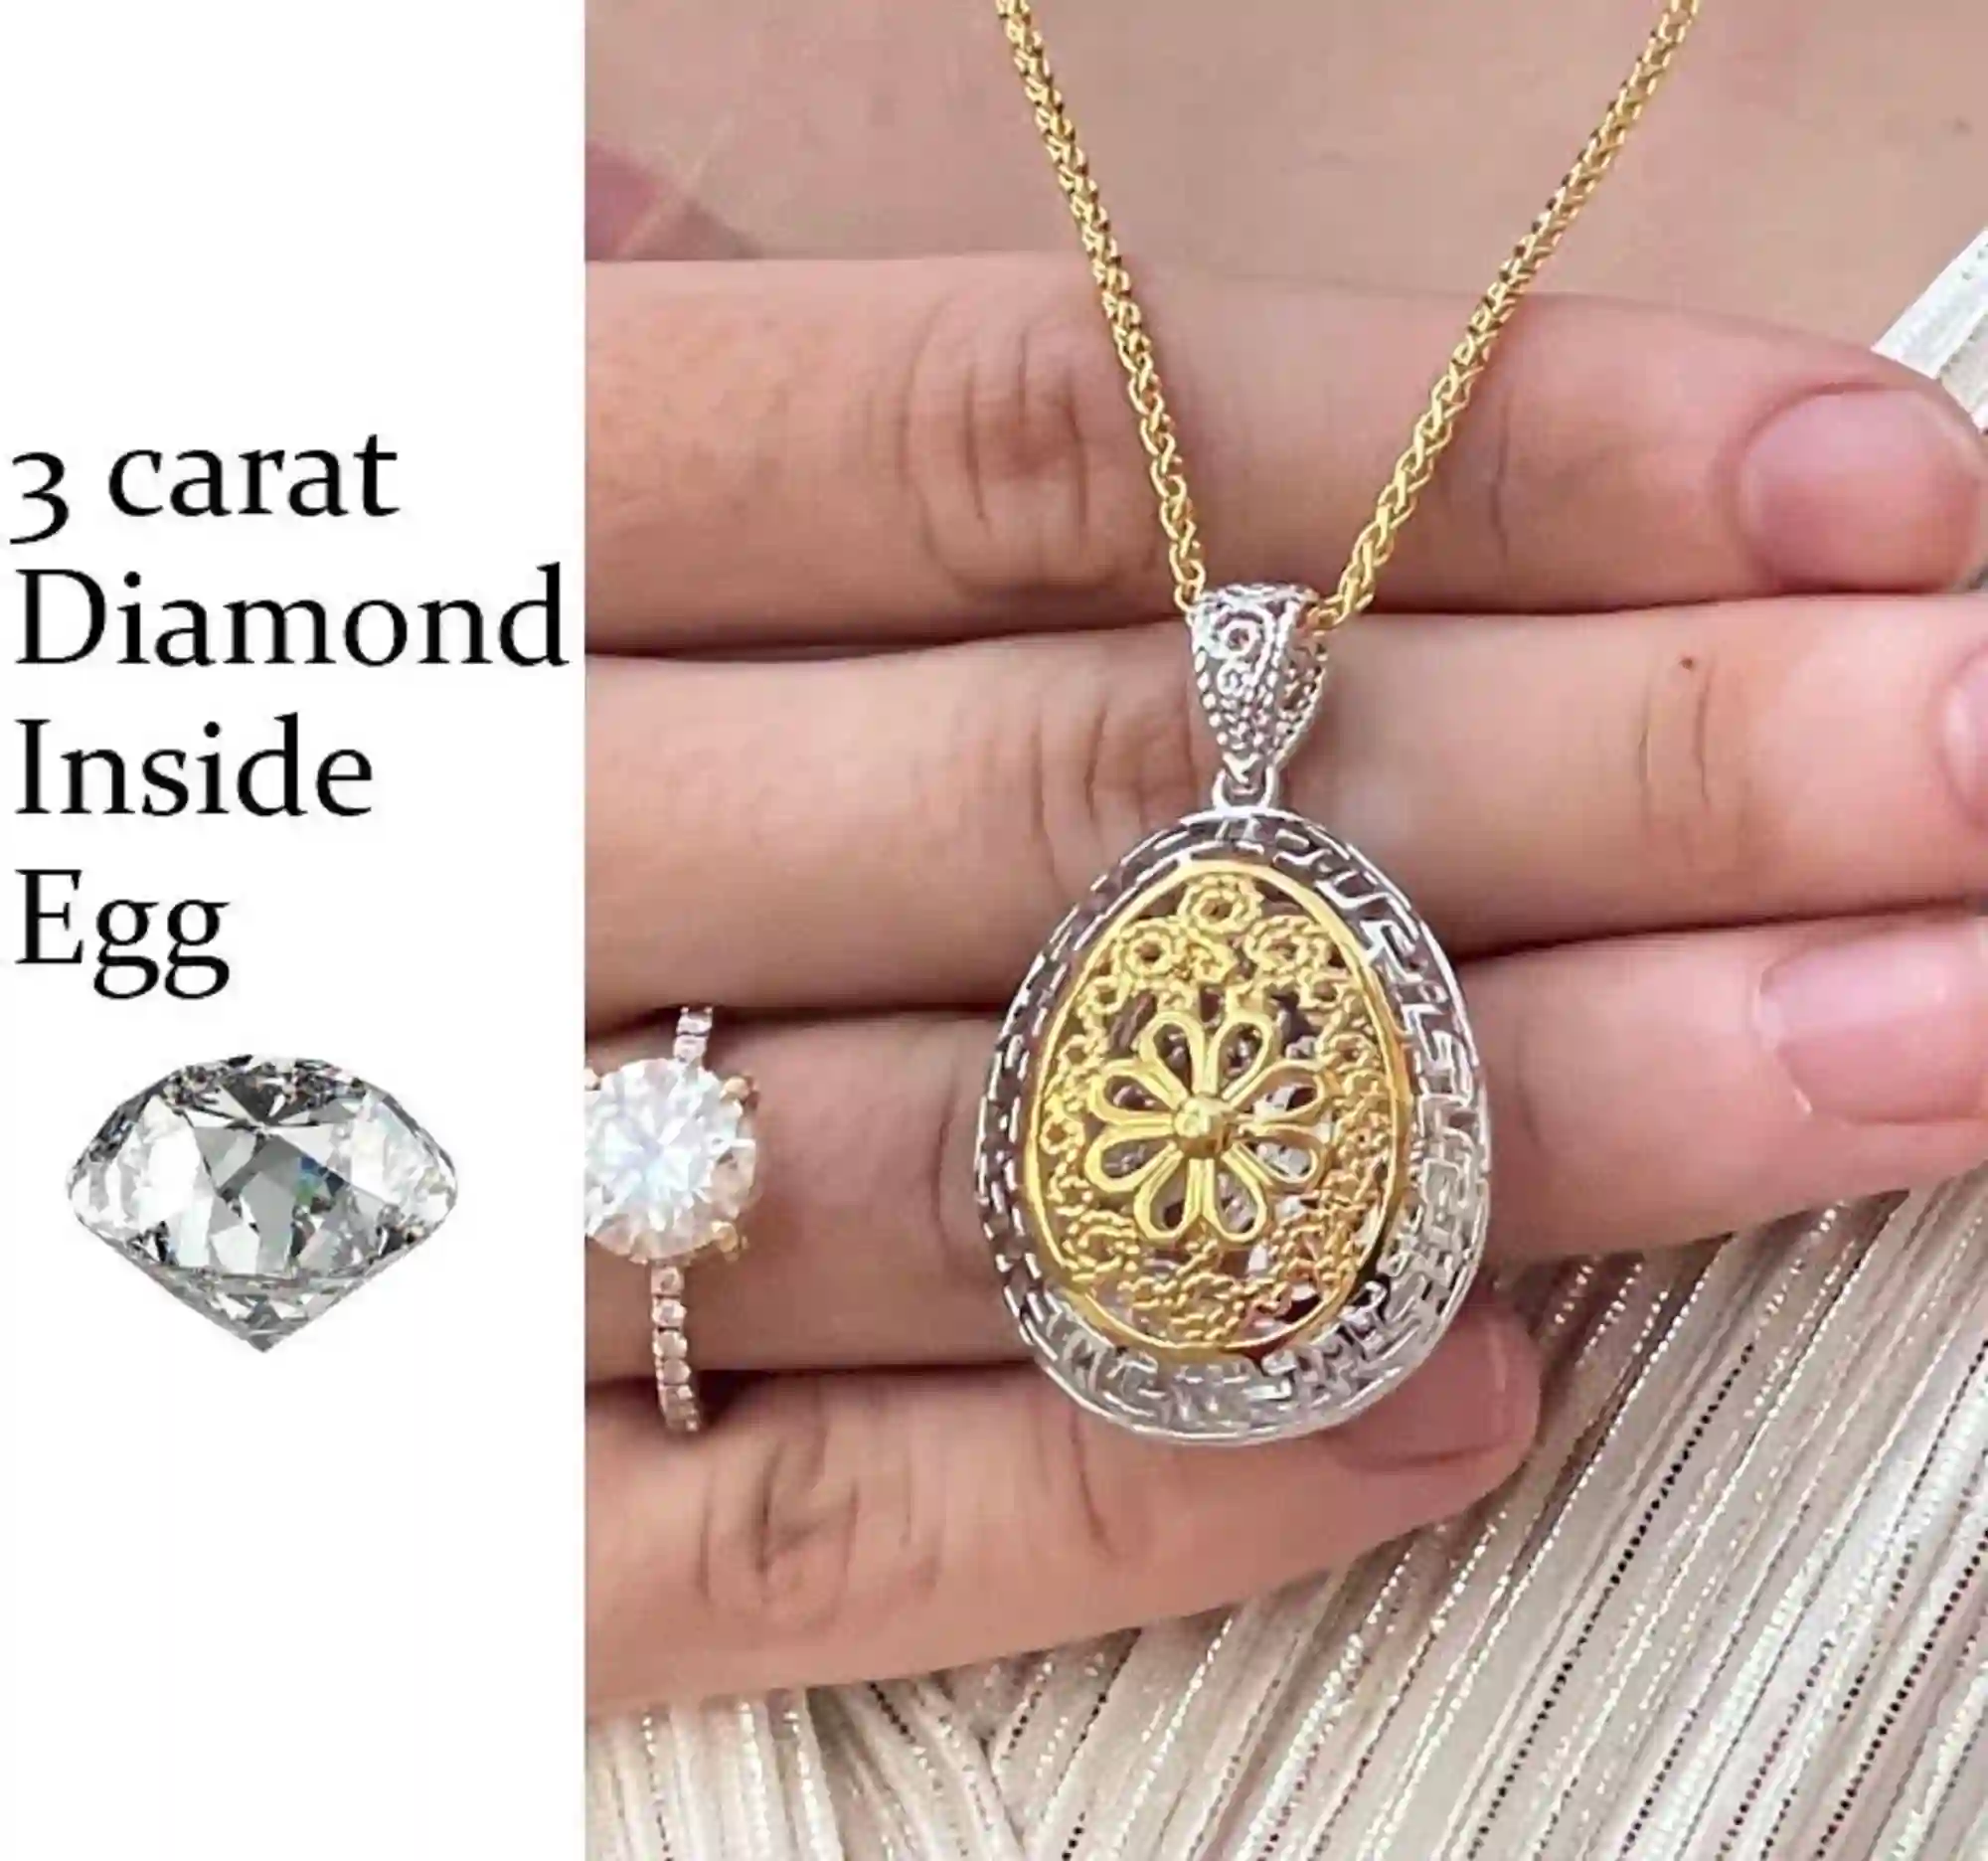 3ct LARGE Gold Diamond Flower Necklace Faberge Egg pendant Sterling Silver SOLID PLATINUM Faberge Egg style Birthday Diamond Neckless 1.6